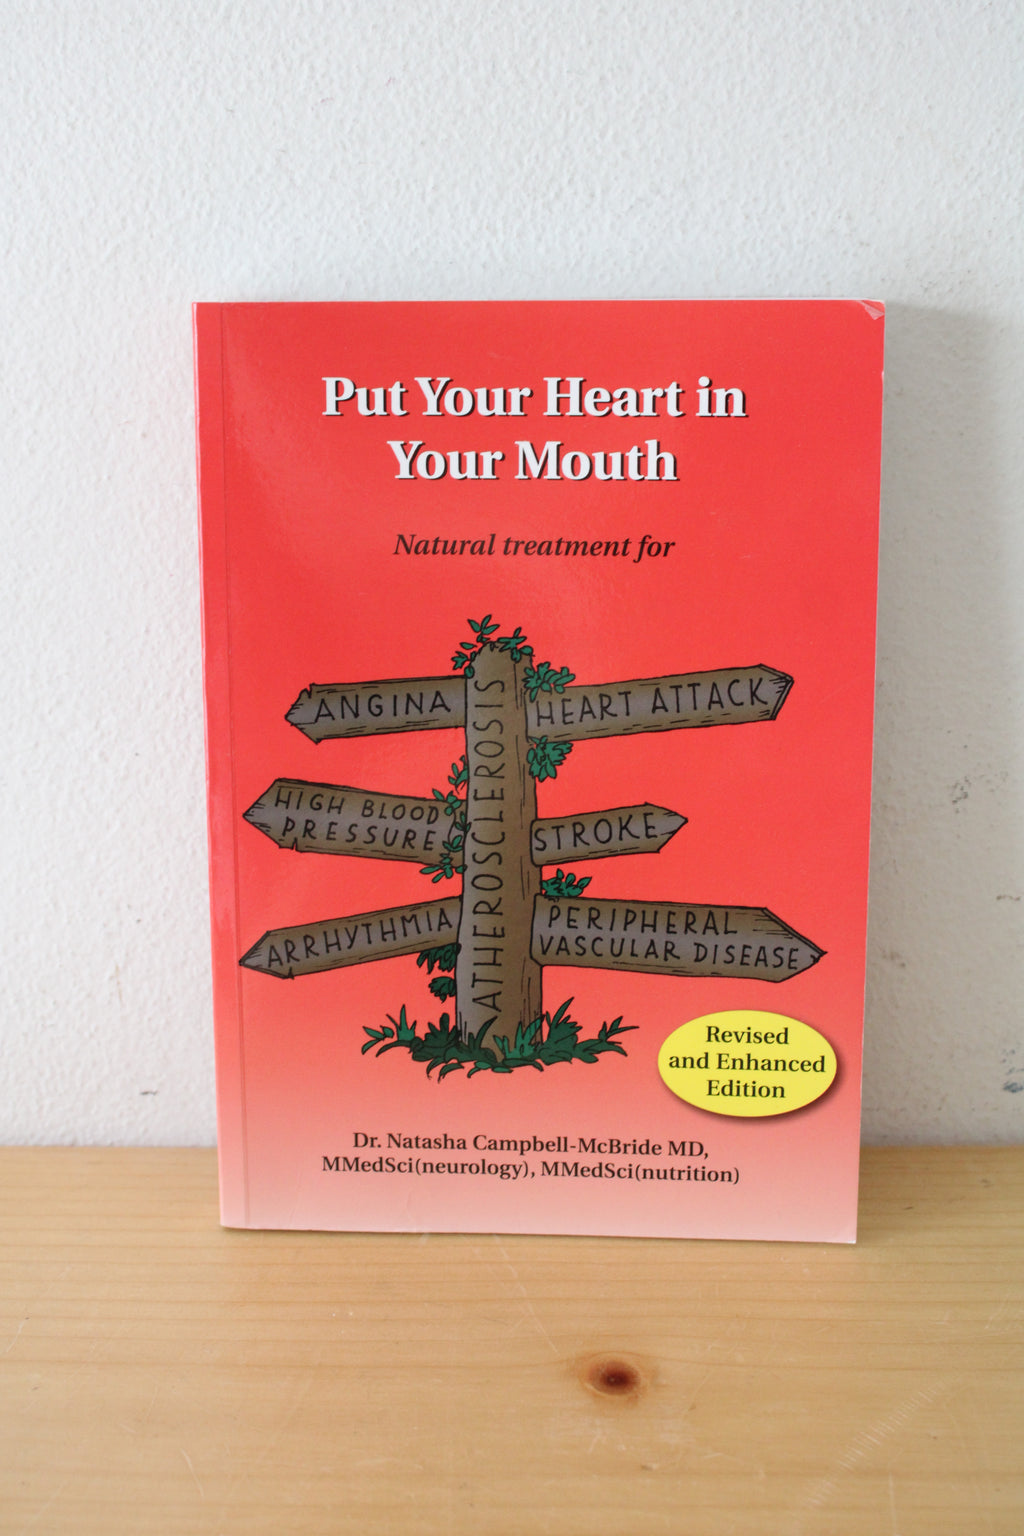 Put Your Heart In Your Mouth: Natural Treatment For Angina, Heart Attack, High Blood Pressure, Stroke, Arrhythmia, Peripheral Vascular Disease, Atherosclerosis